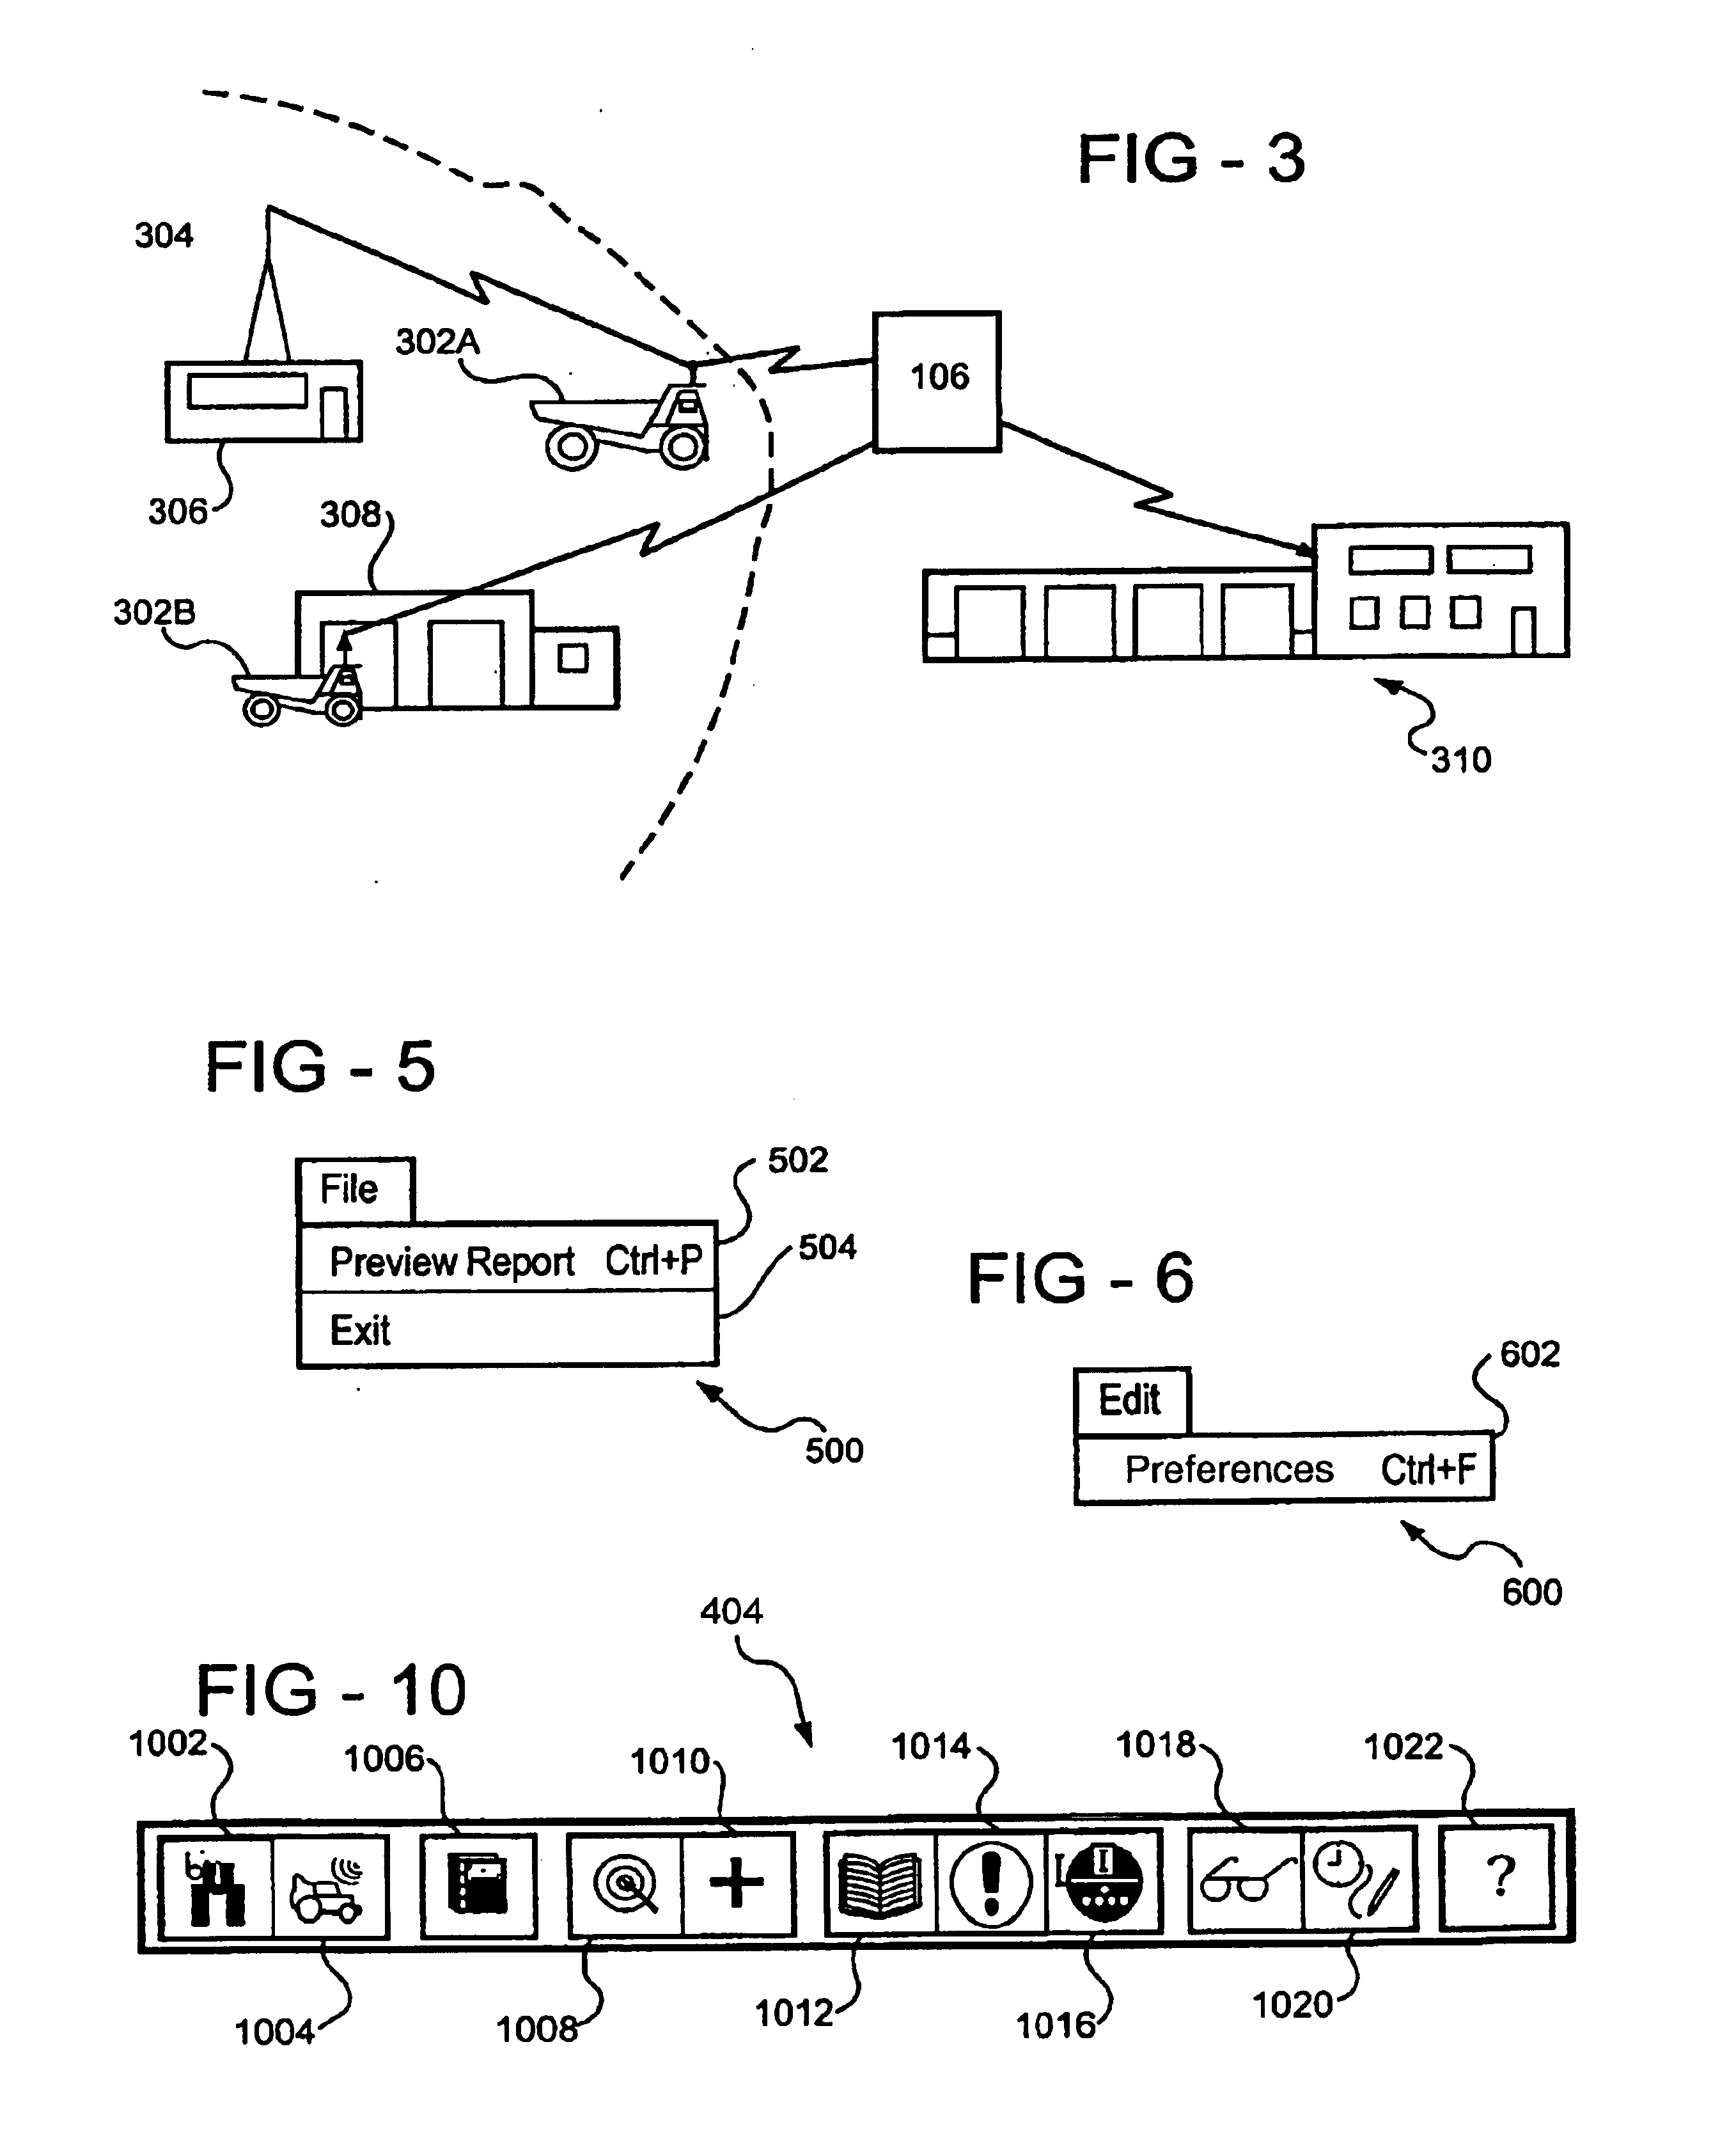 Apparatus and method for displaying information related to a machine